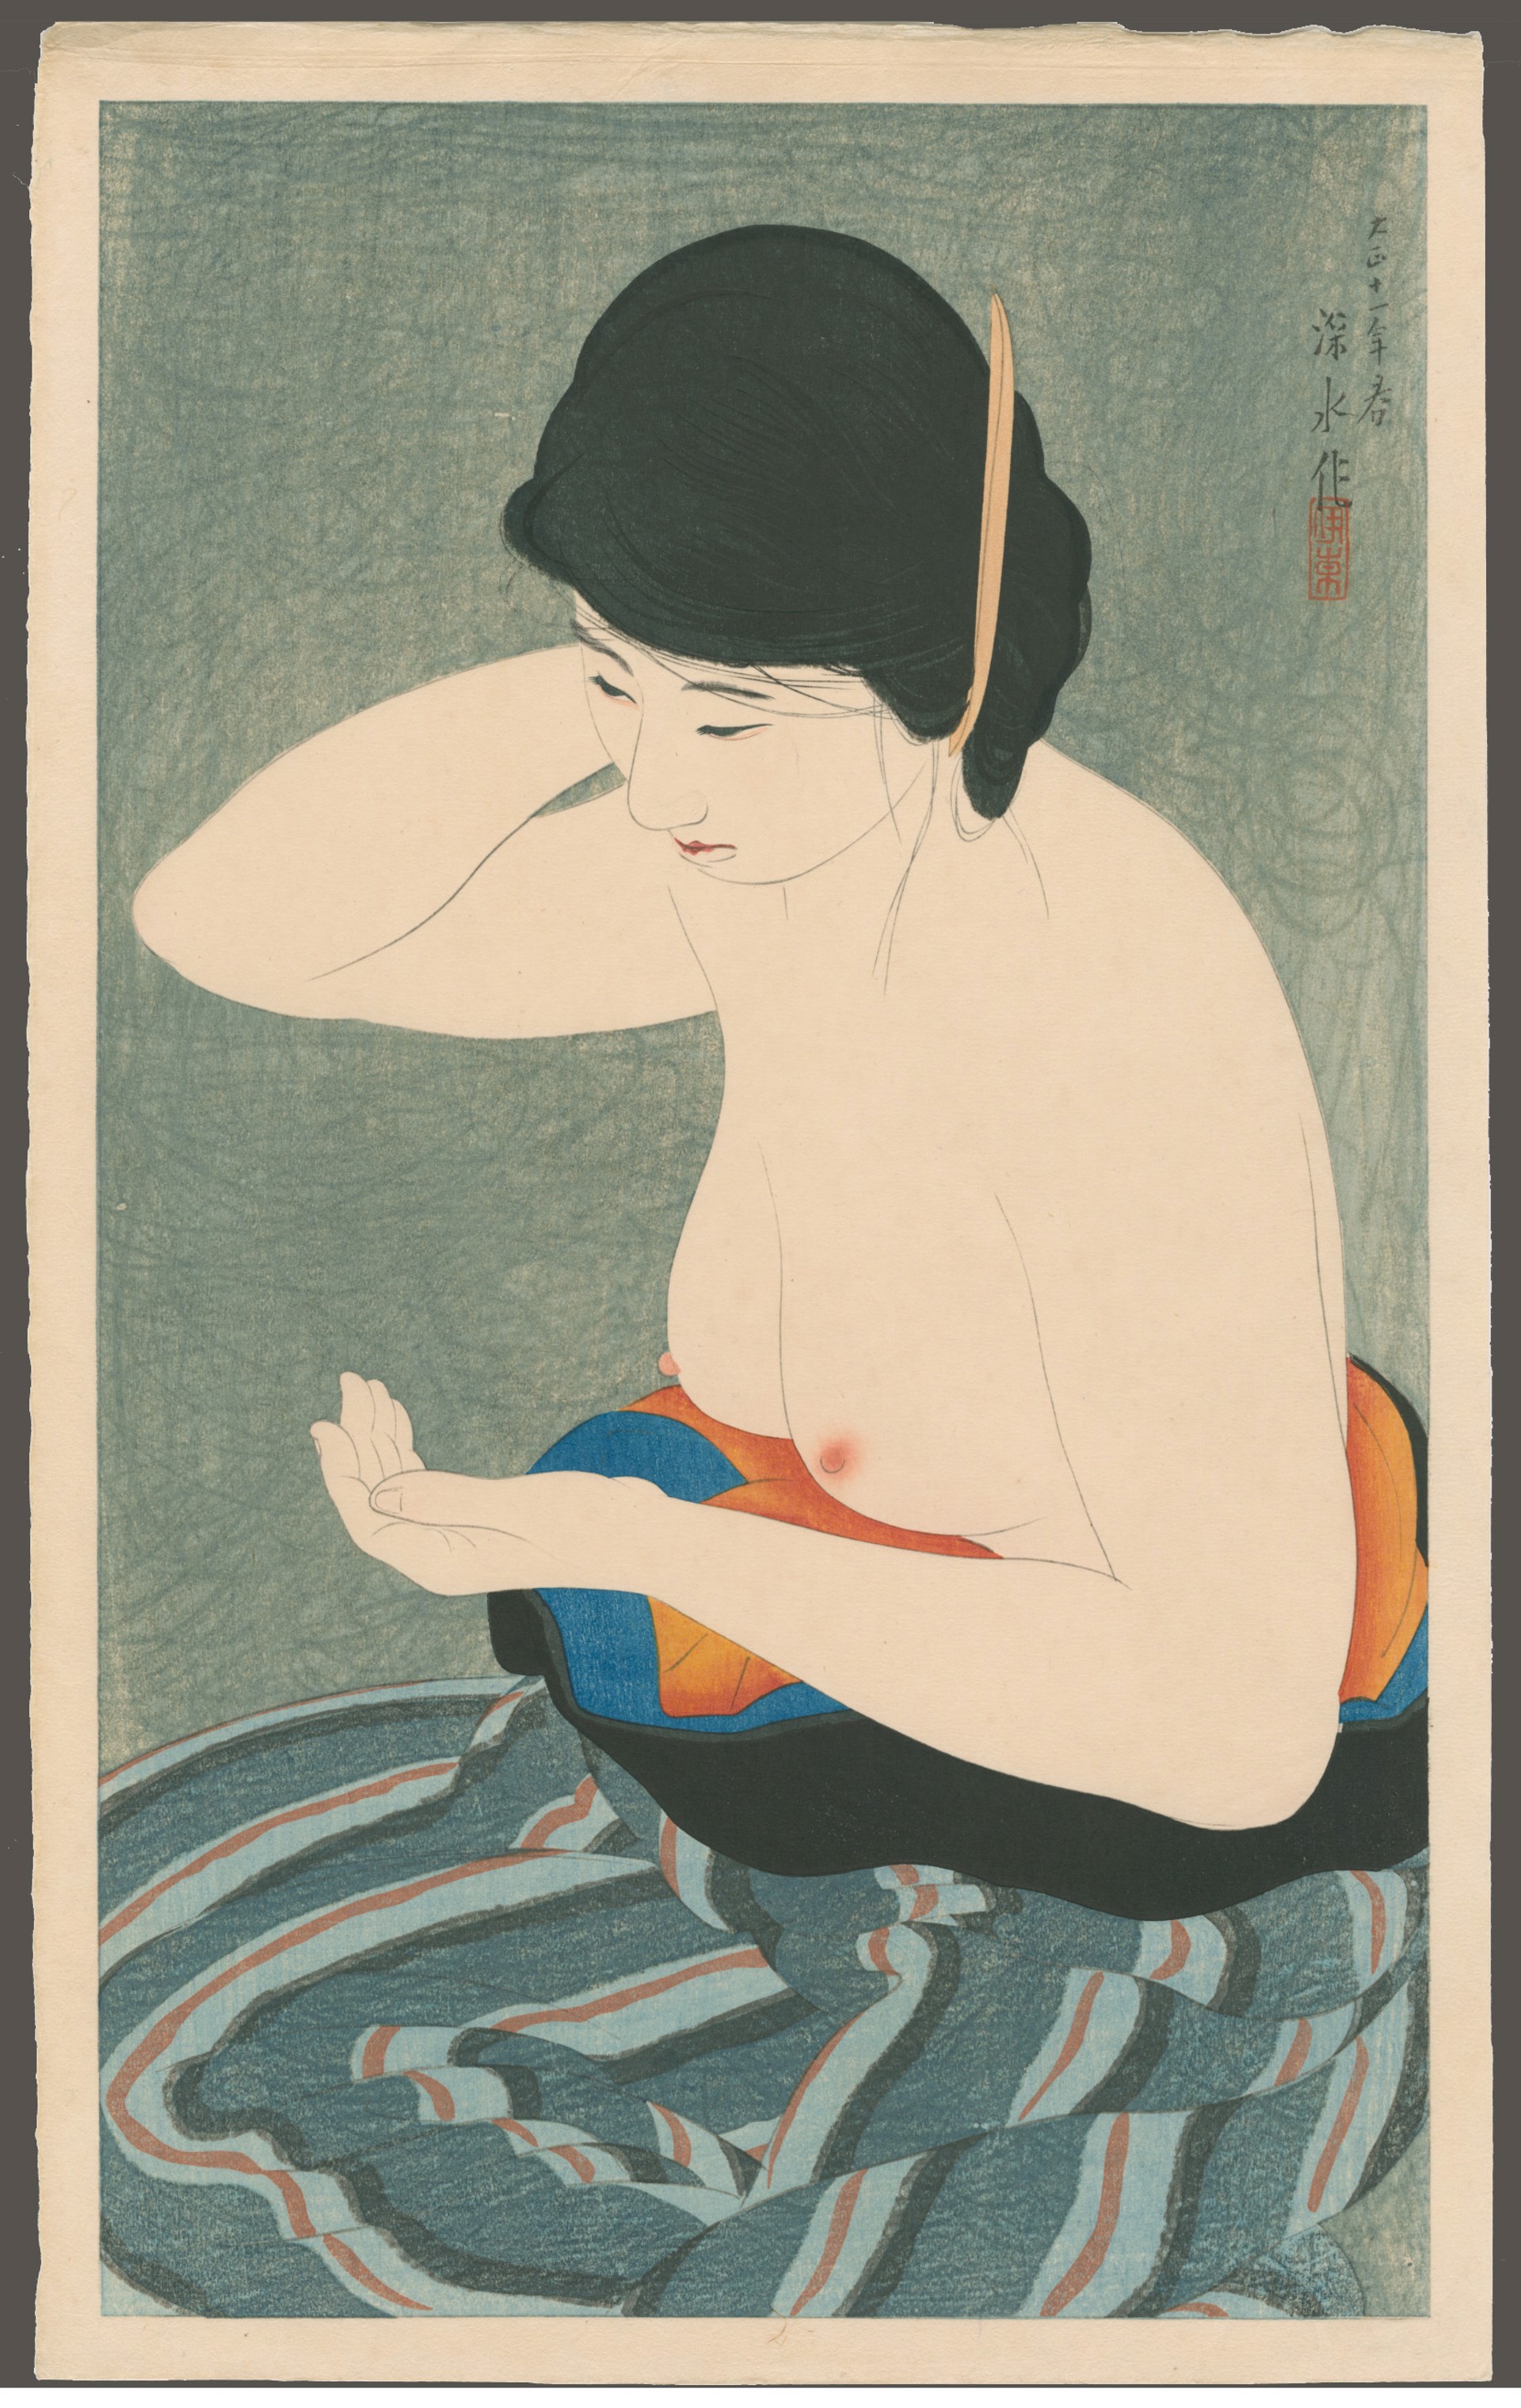 Make-up  15/200 New 12 Images of Beauties by Shinsui